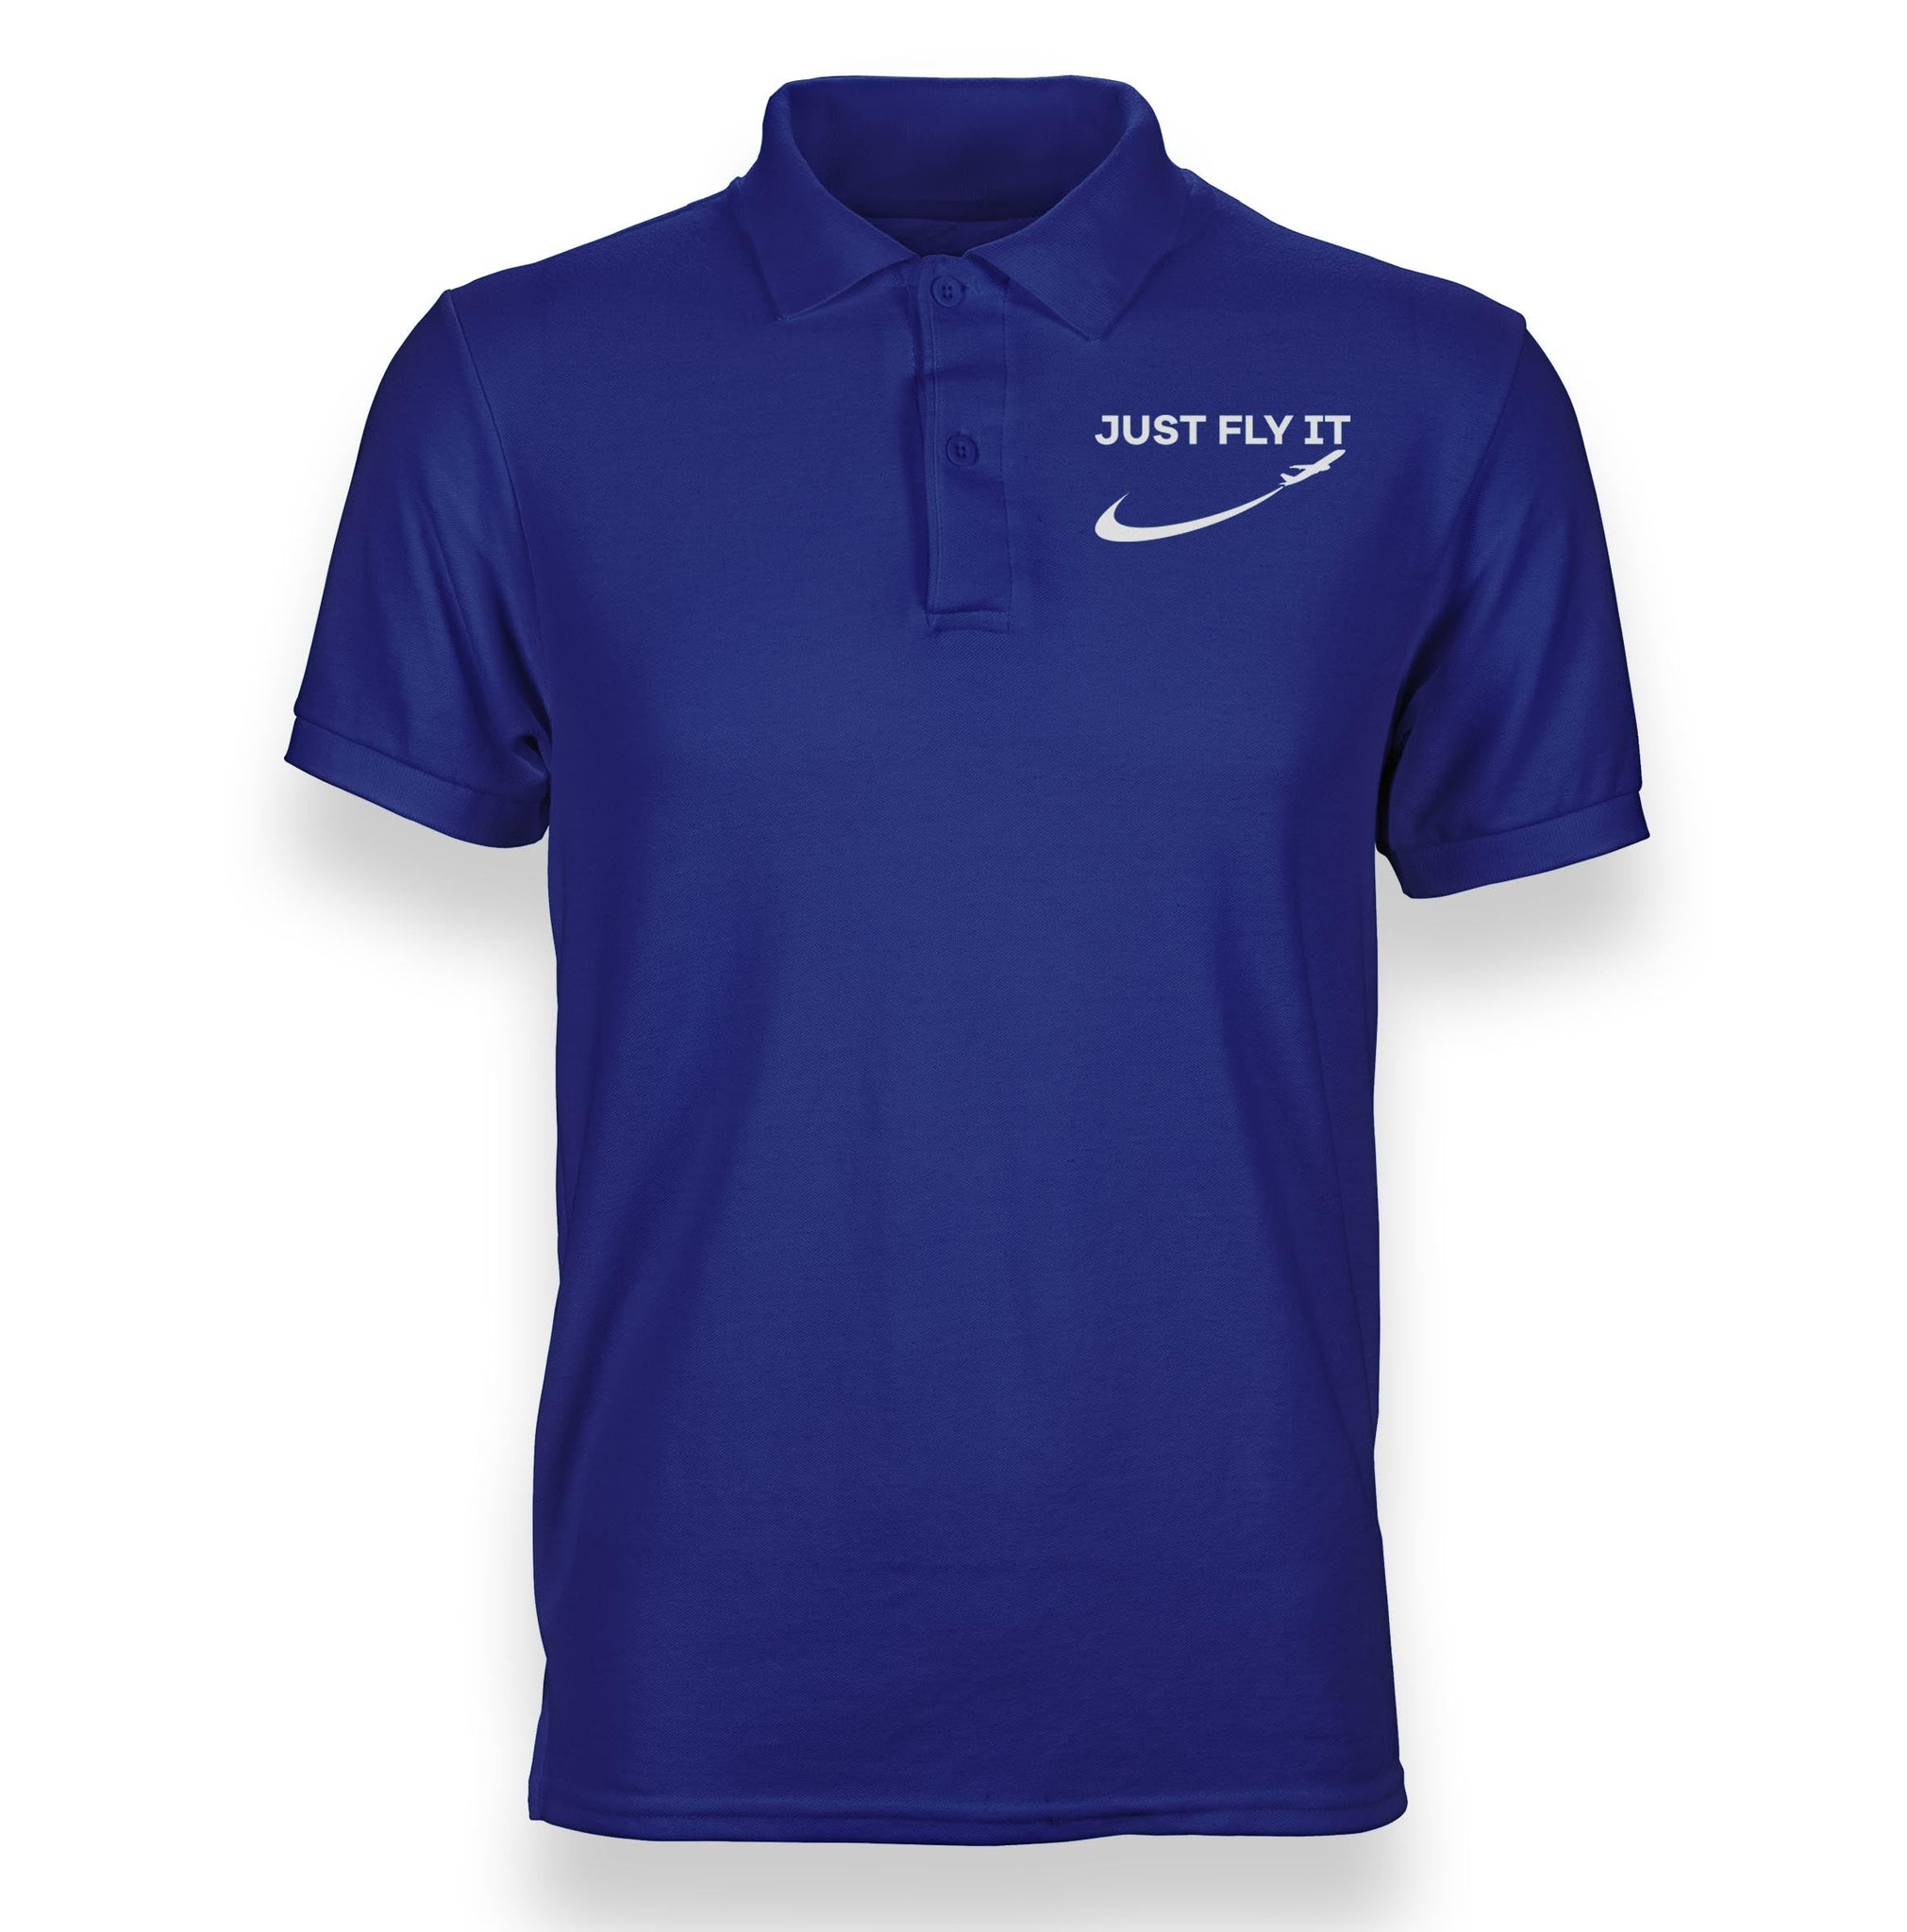 Just Fly It 2 Designed Polo T-Shirts